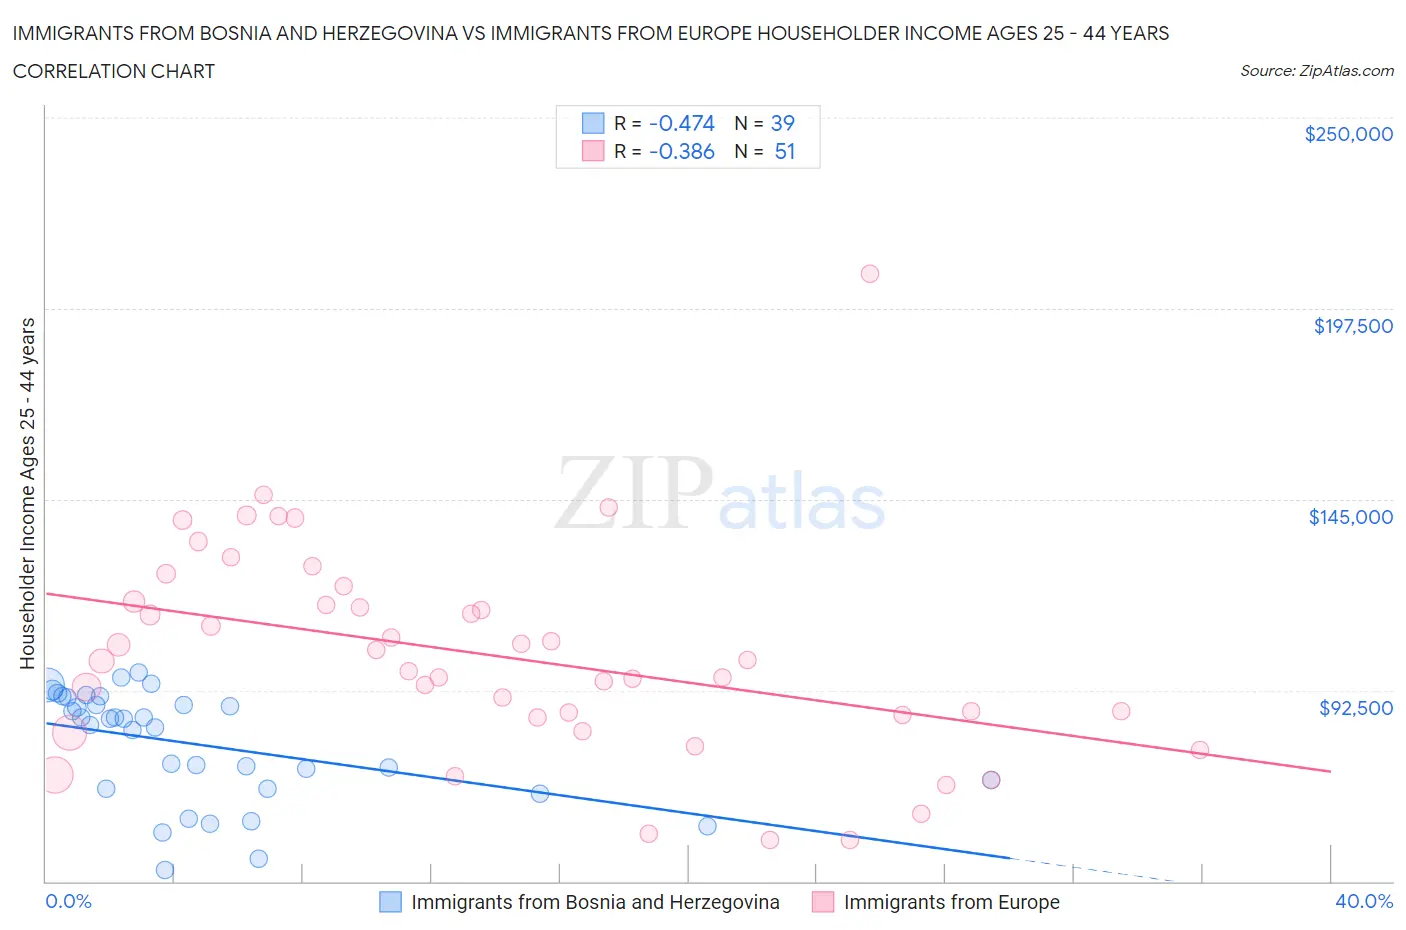 Immigrants from Bosnia and Herzegovina vs Immigrants from Europe Householder Income Ages 25 - 44 years